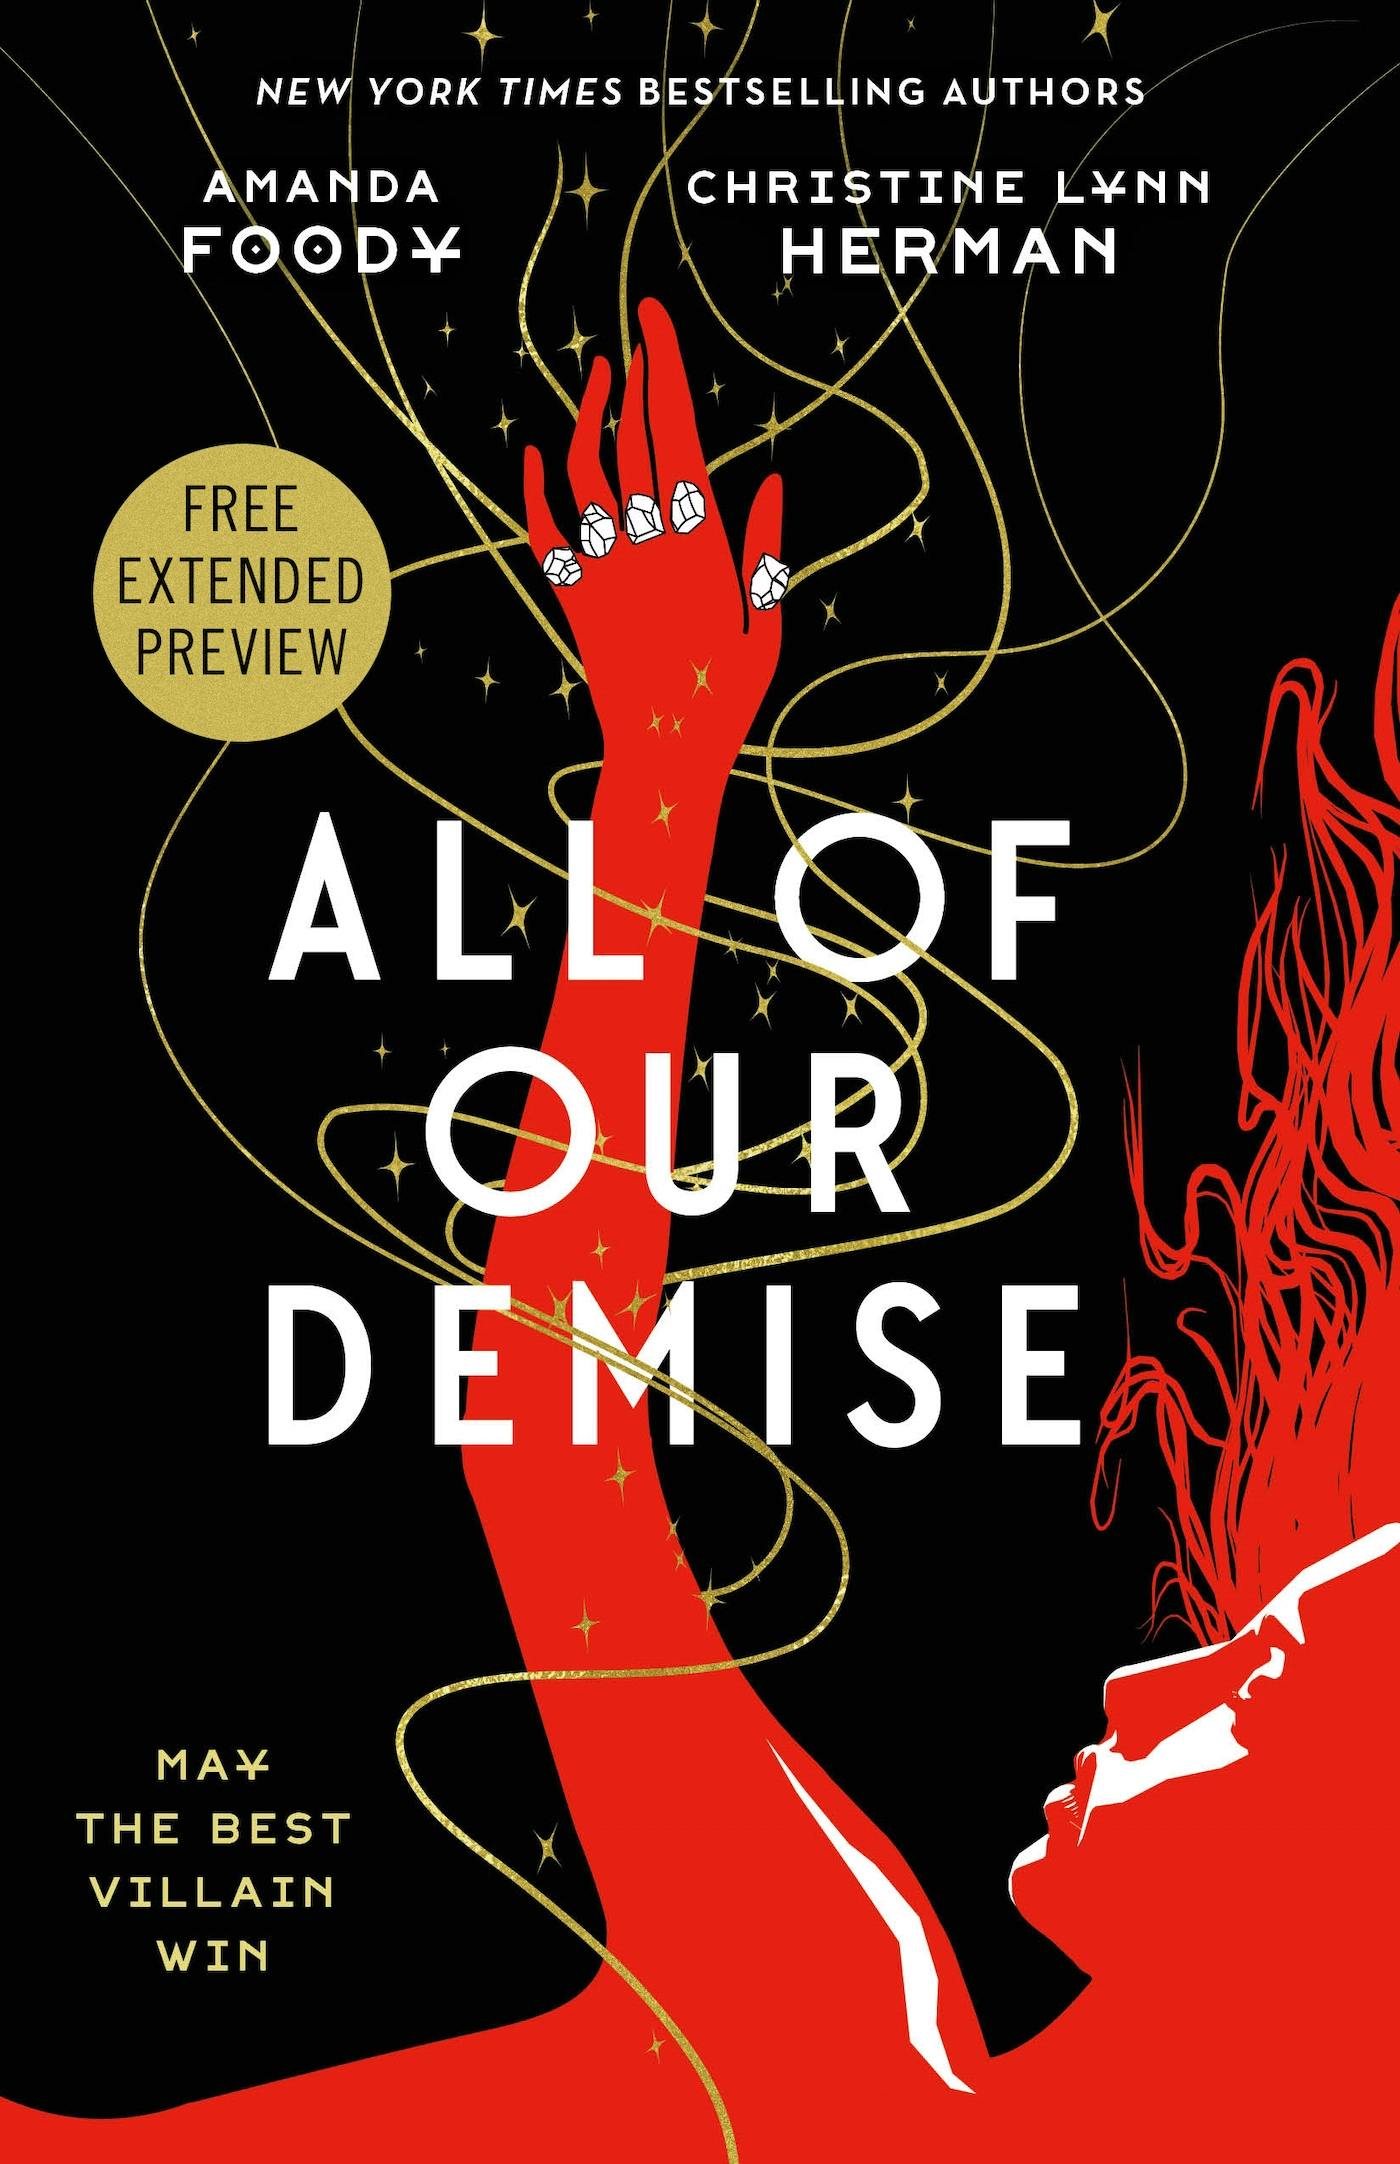 Cover for the book titled as: All of Our Demise Sneak Peek